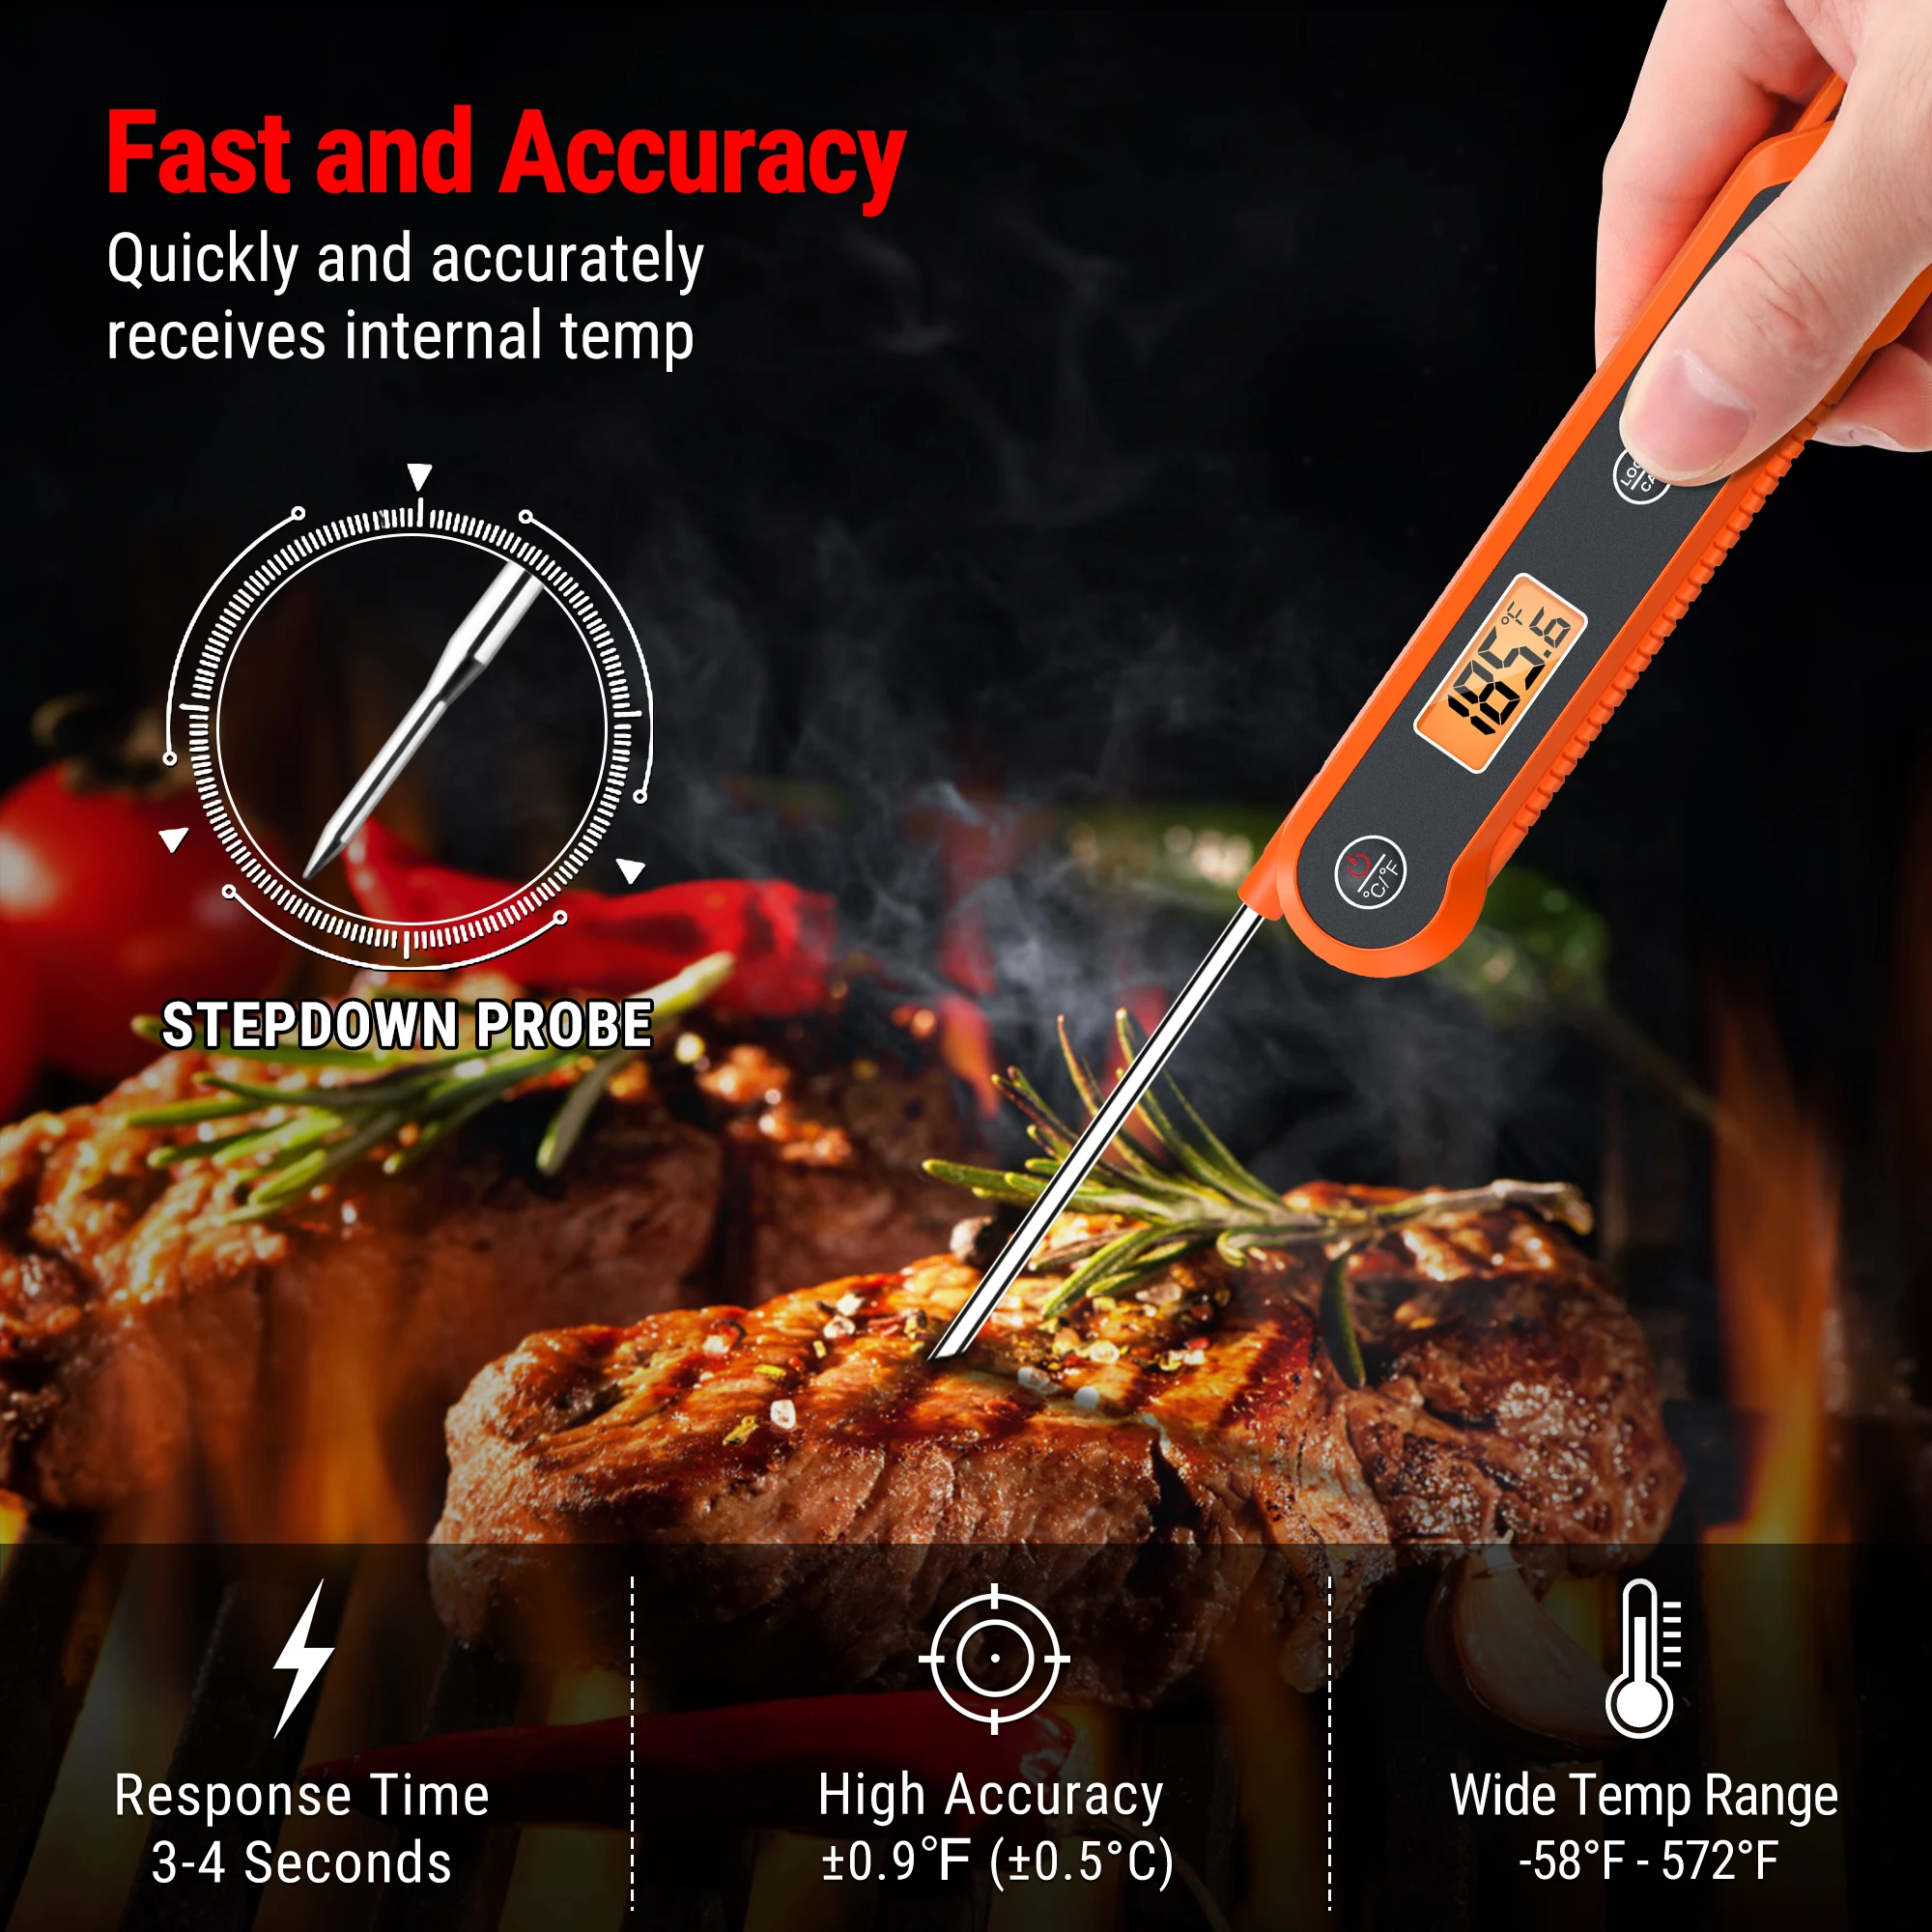 https://ae01.alicdn.com/kf/S91b21560f6b74c98b114c813ec8fcd20A/ThermoPro-TP03H-Waterproof-Digital-Backlight-Folding-Barbecue-Kitchen-Cooking-Instant-Readin-Meat-Thermometer.jpg